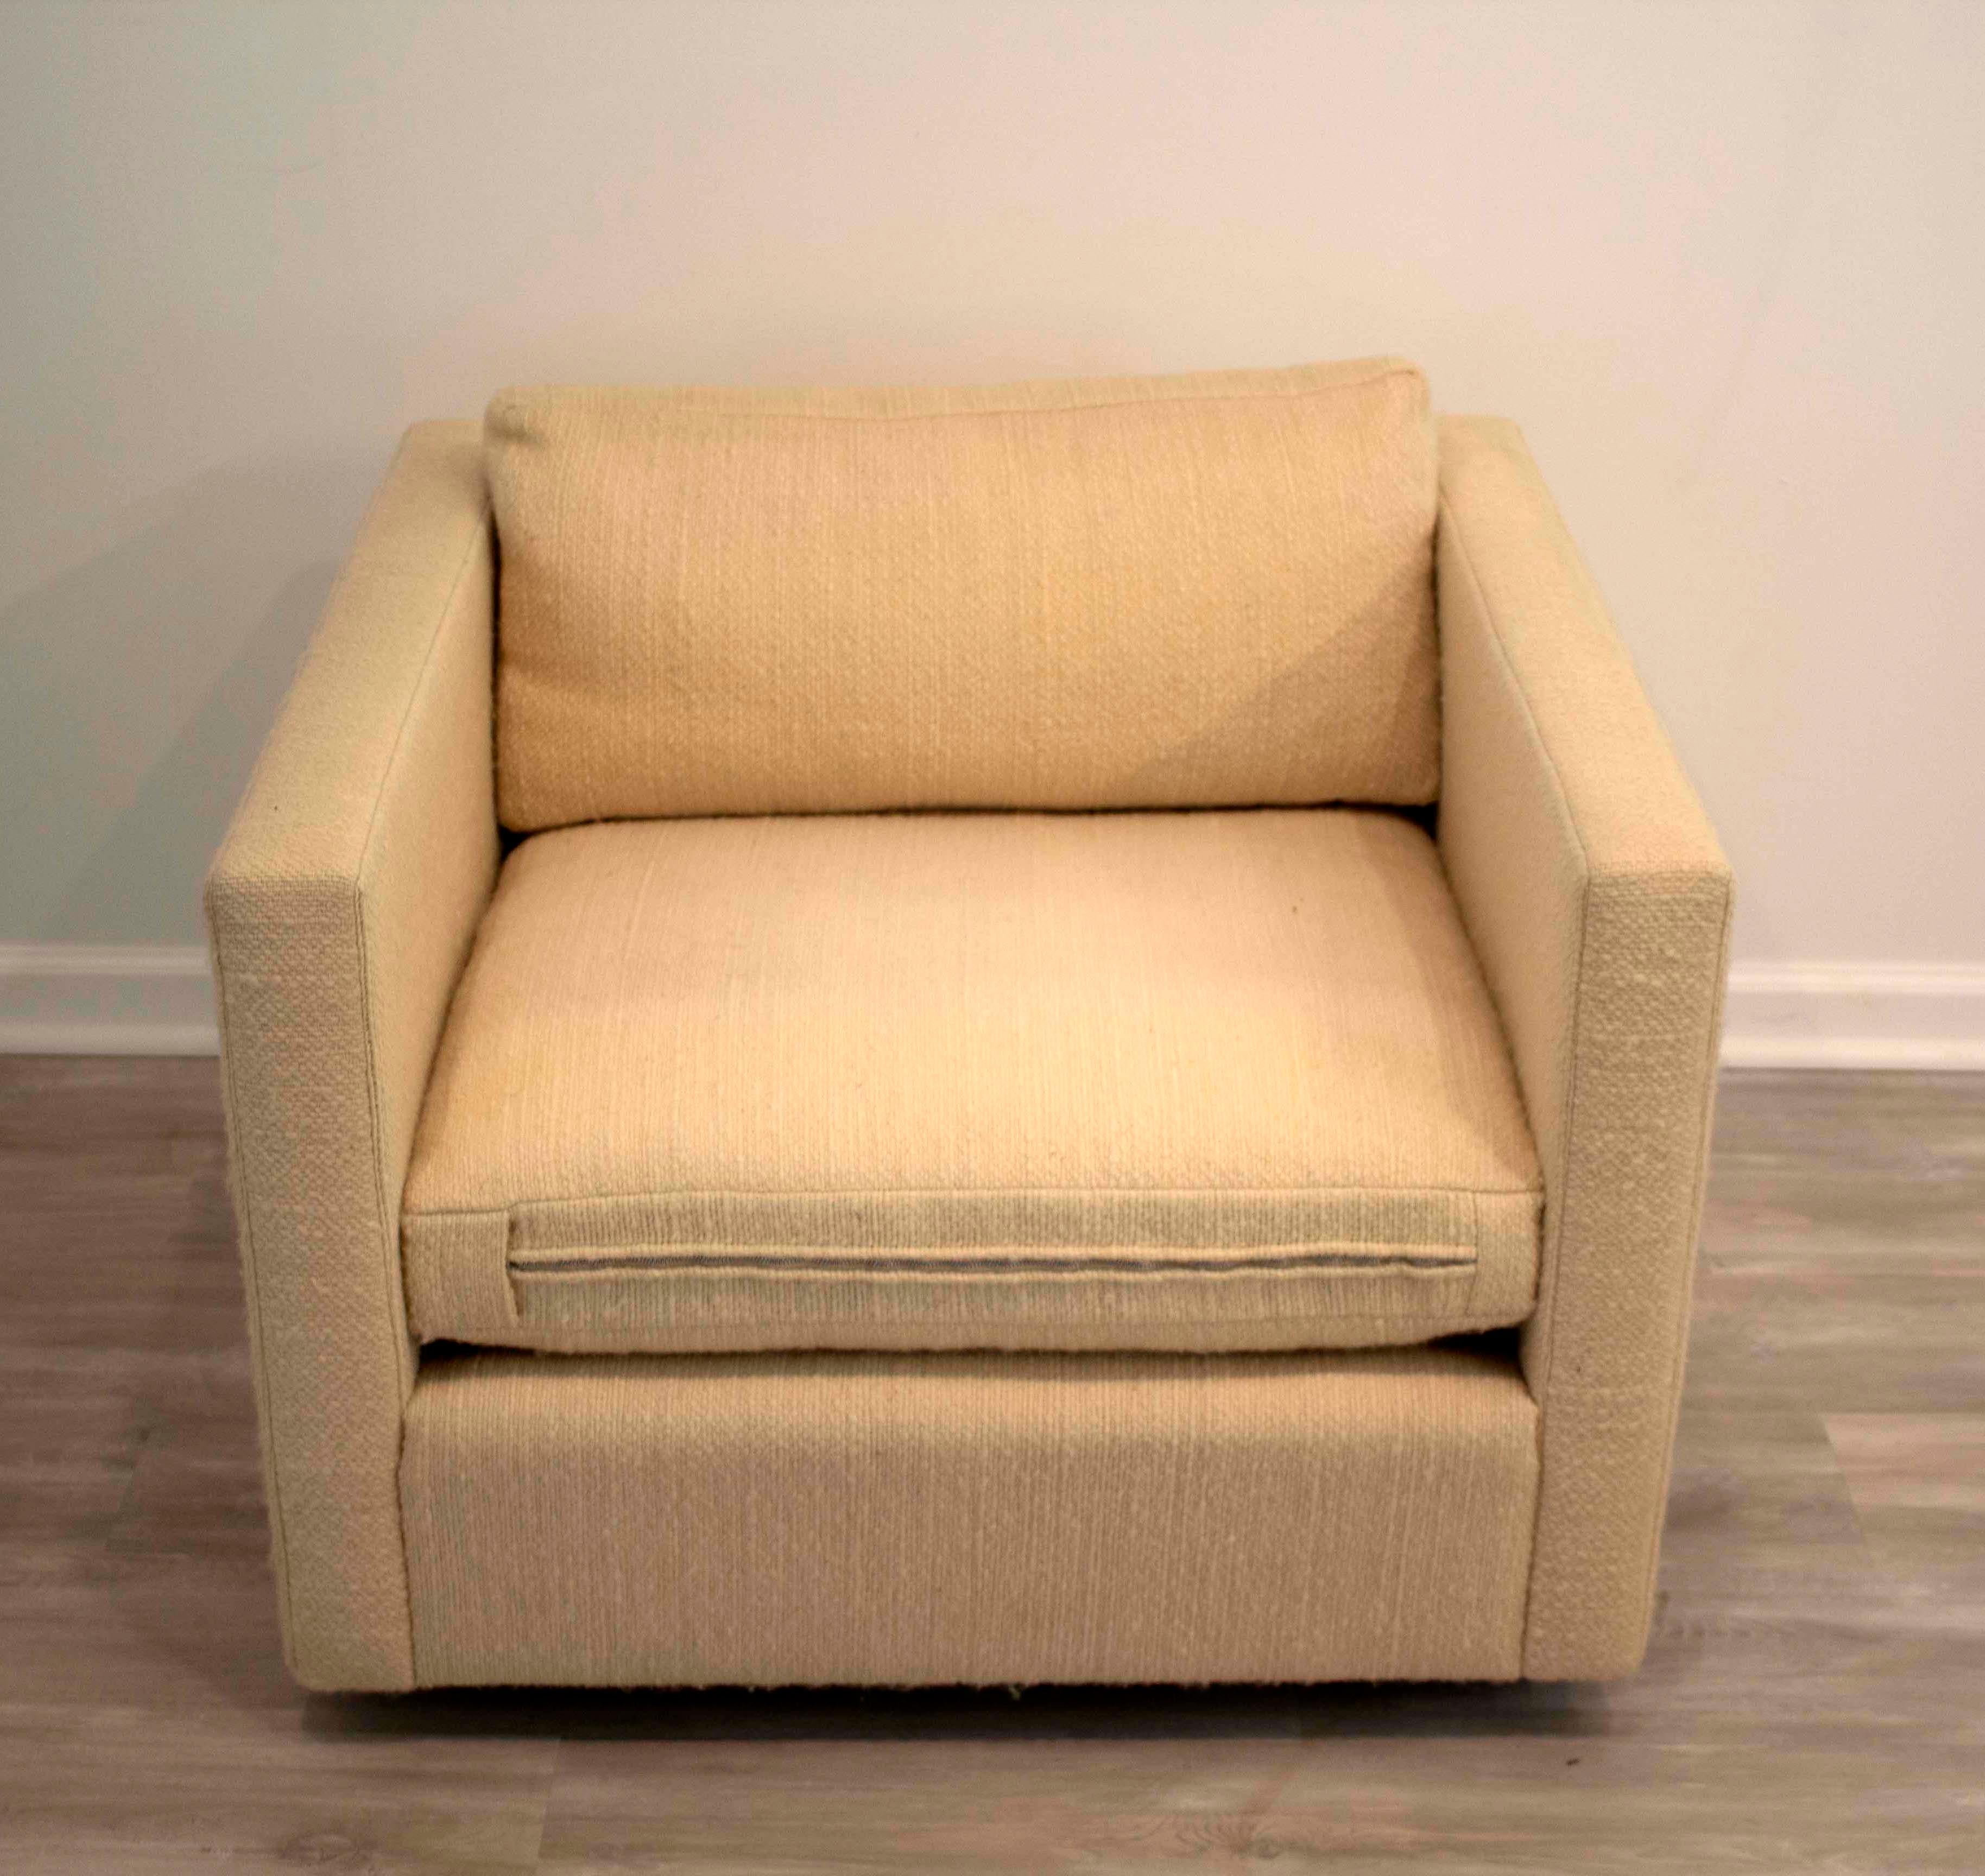 Up for sale is this creme boucle club chair from Florence Knoll in very good condition with few noticeable flaws, including the creme boucle upholstery, cushions and frame. The cube chair feature tuxedo arms and back making this a low profile piece